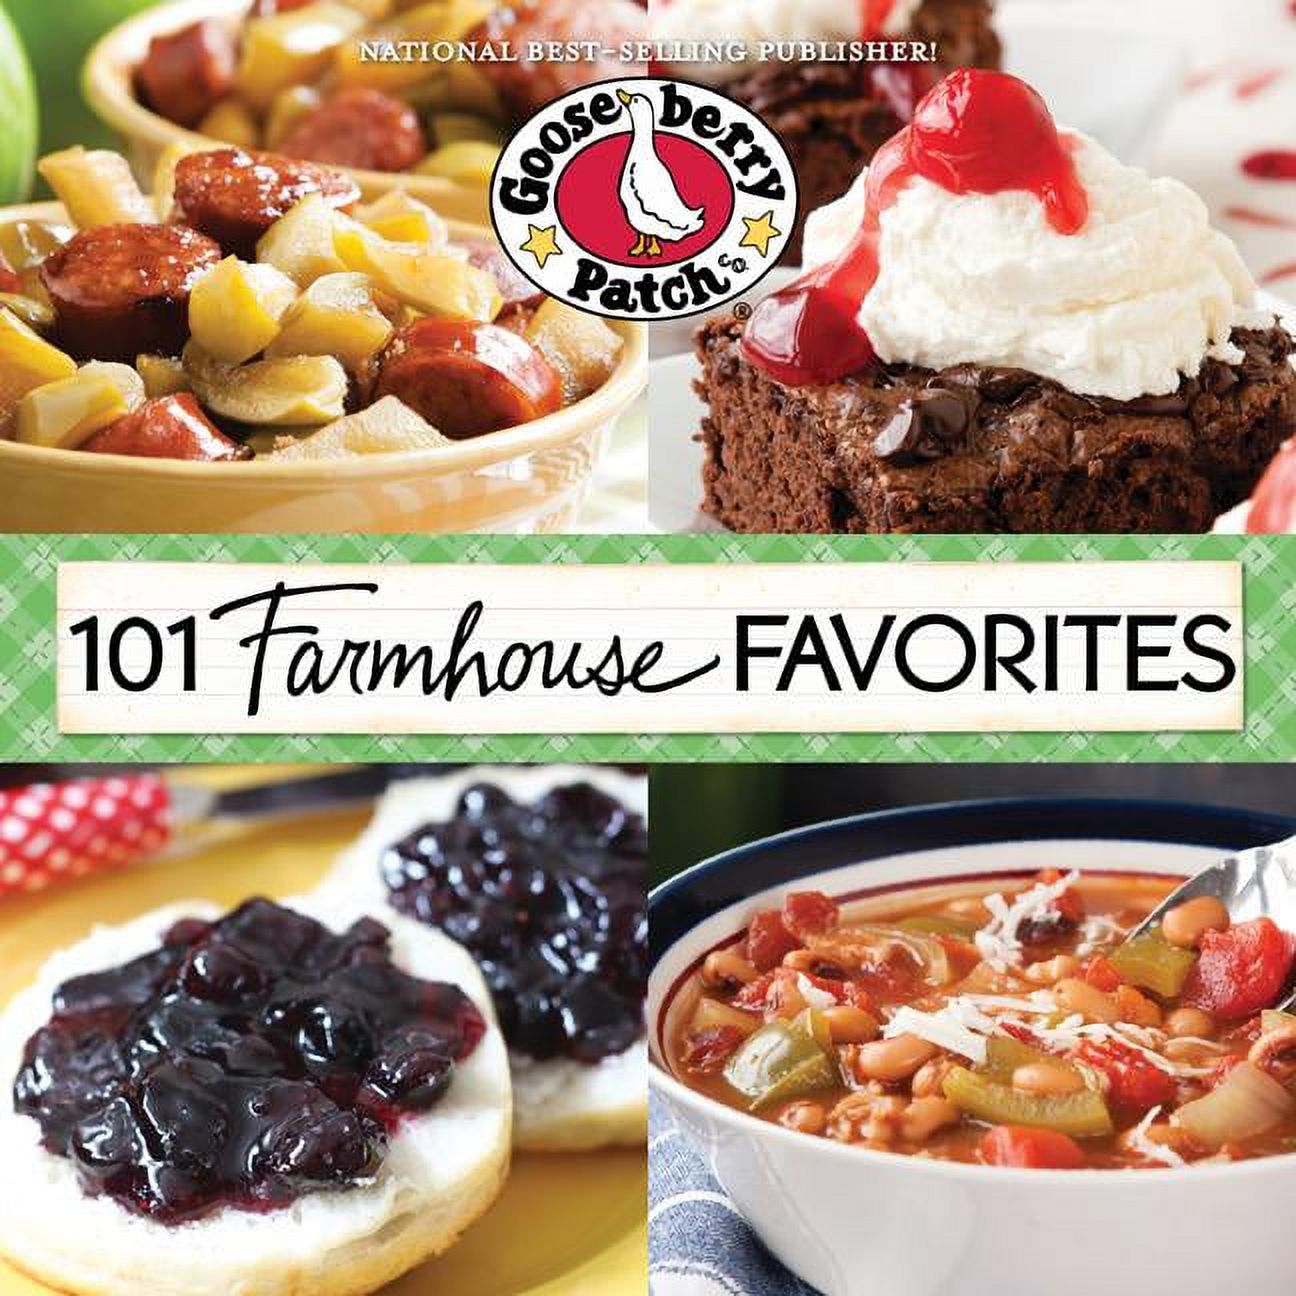 101 Farmhouse Favorites (Hardcover) by Gooseberry Patch - image 1 of 2